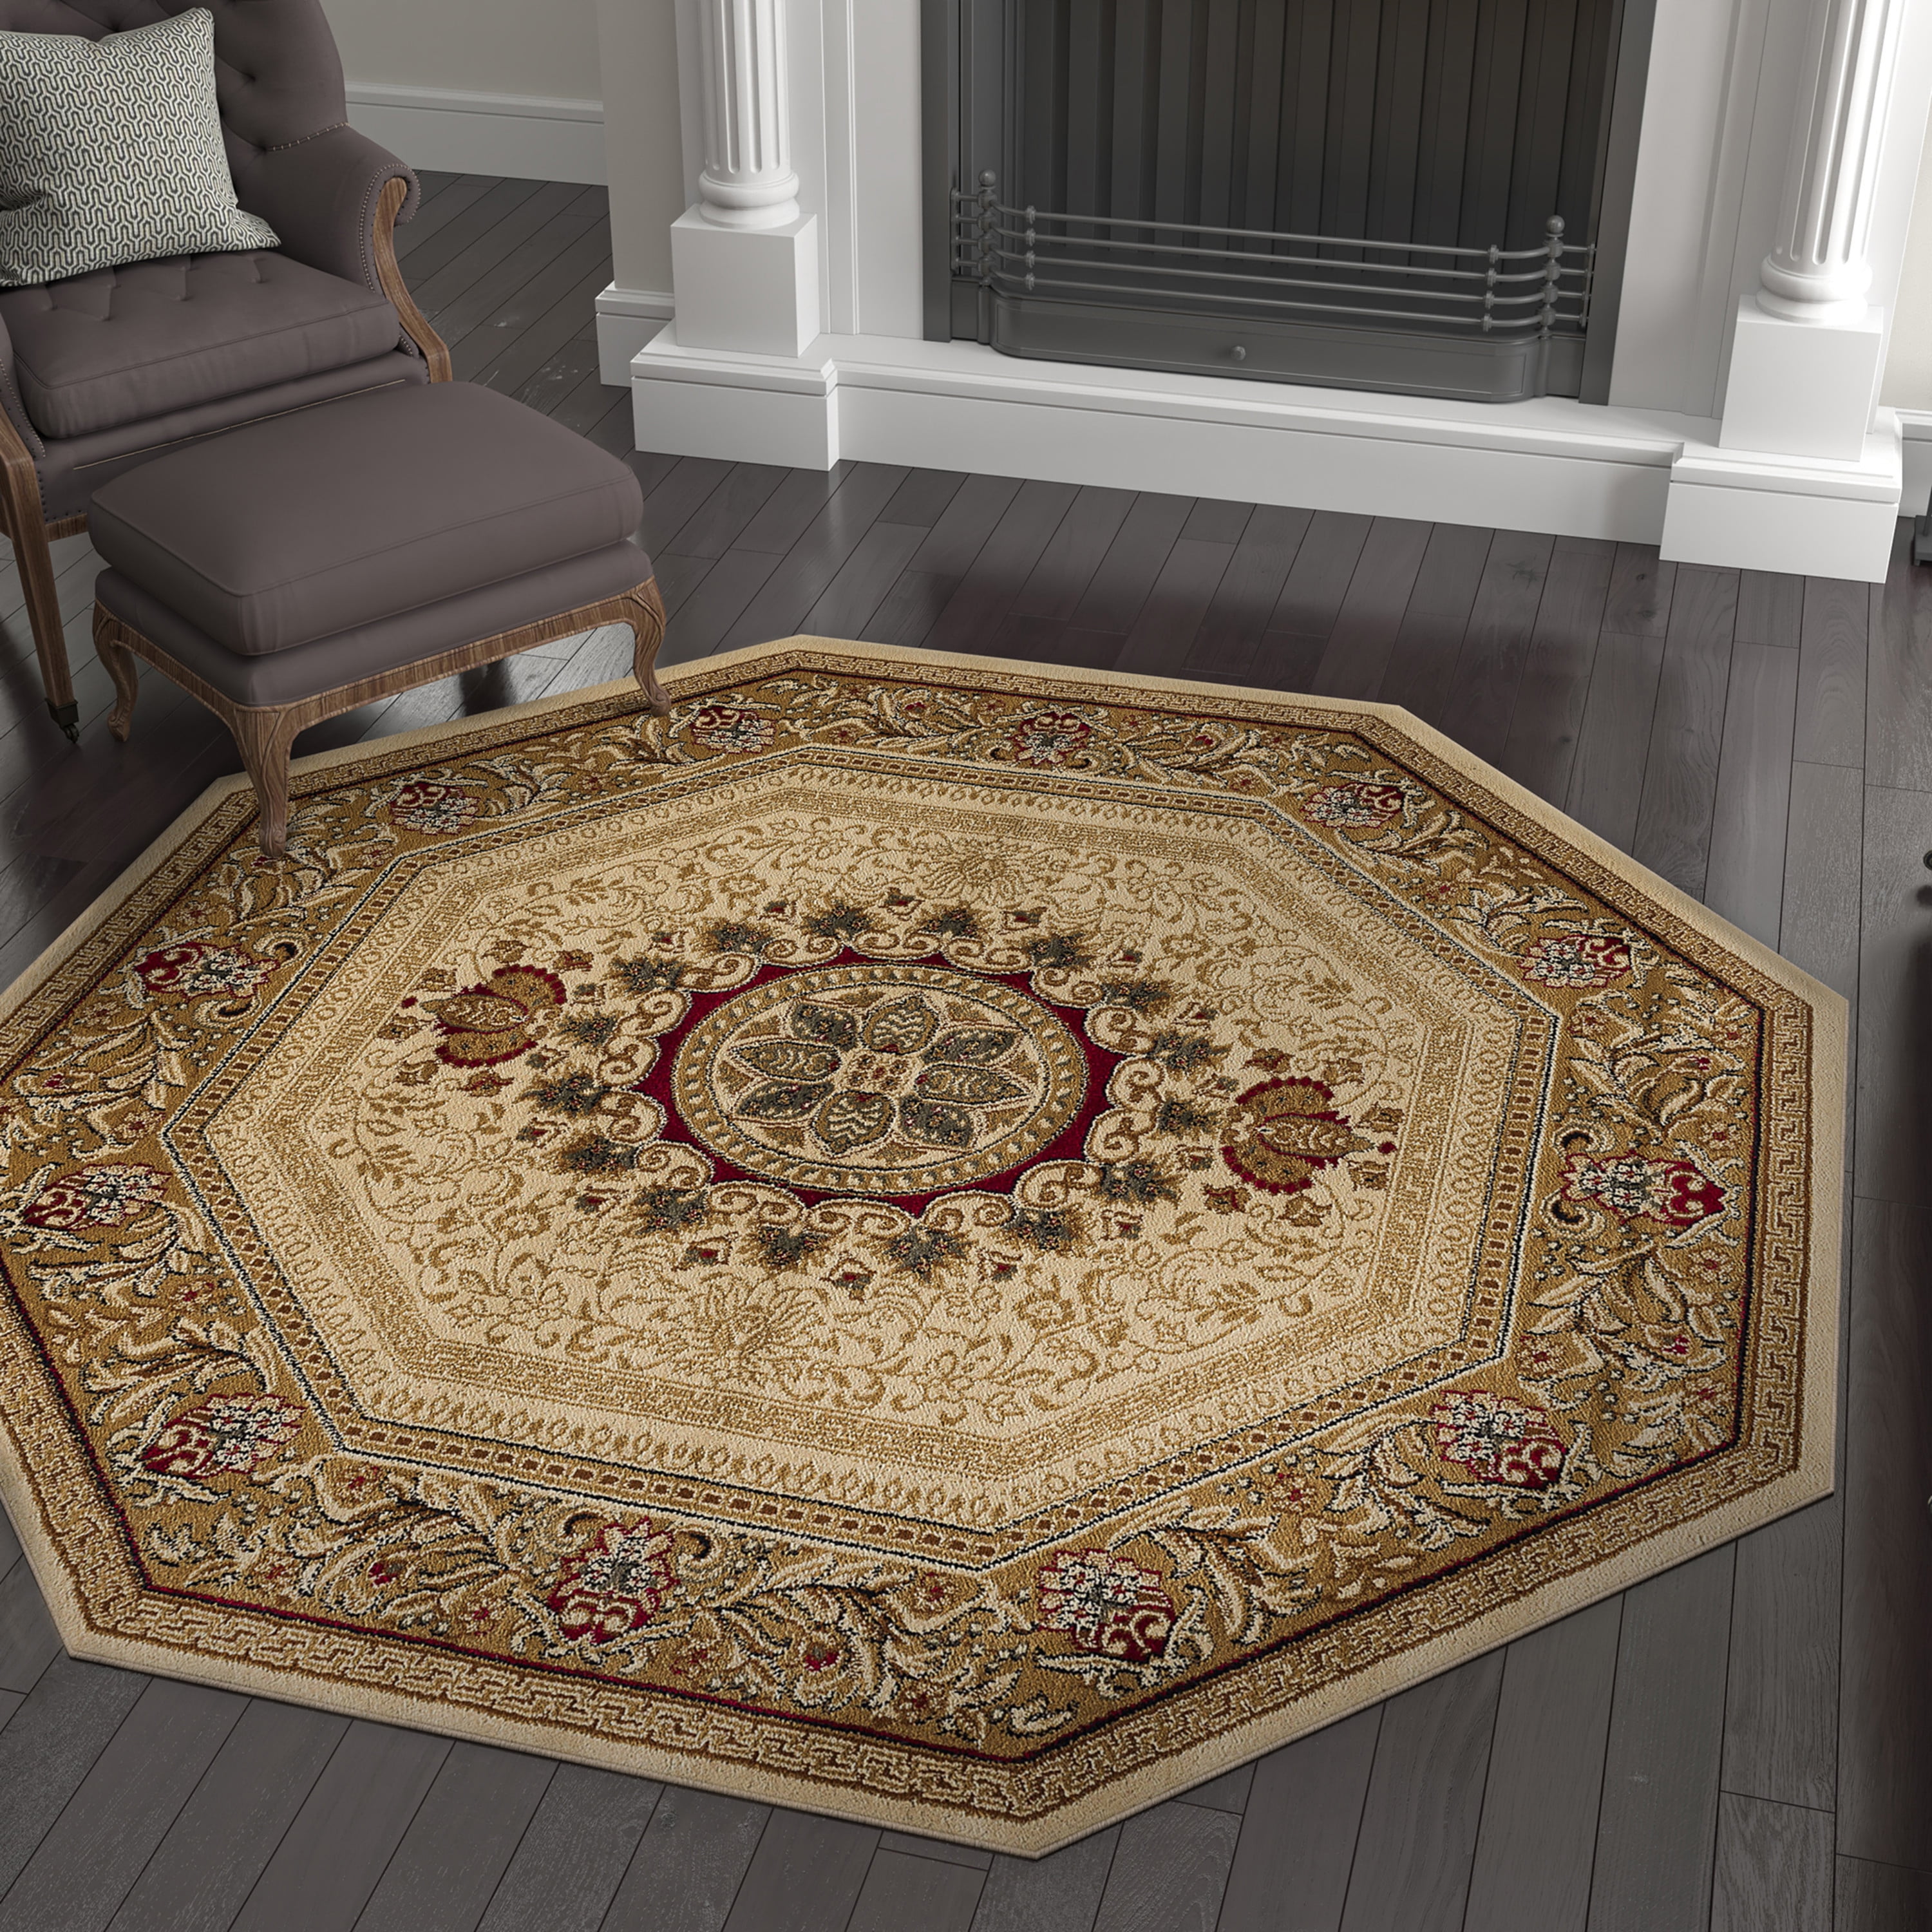 6oct Traditional Ivory Octagon Area Rugs For Living Room Bedroom Rug Dining Indoor Entry Or Entryway Kitchen Alfombras Para Salas 5 3 Com